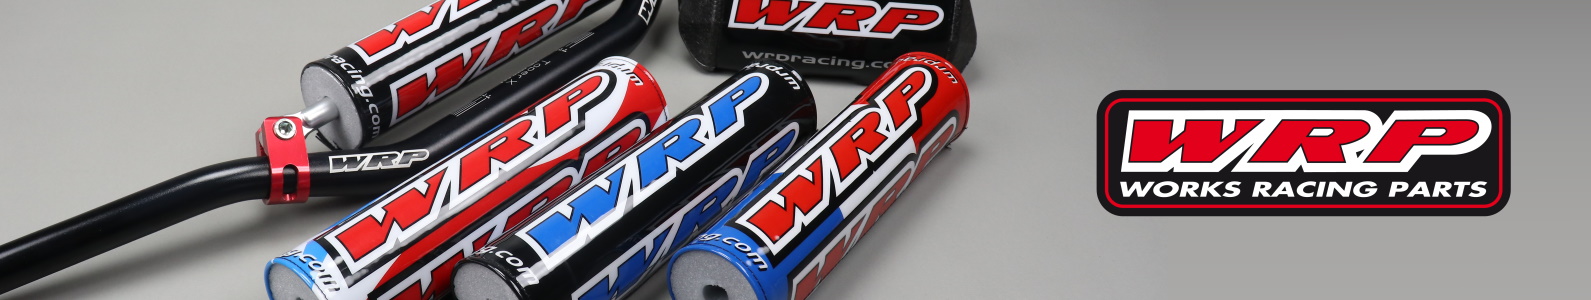 WRP motorcycle parts